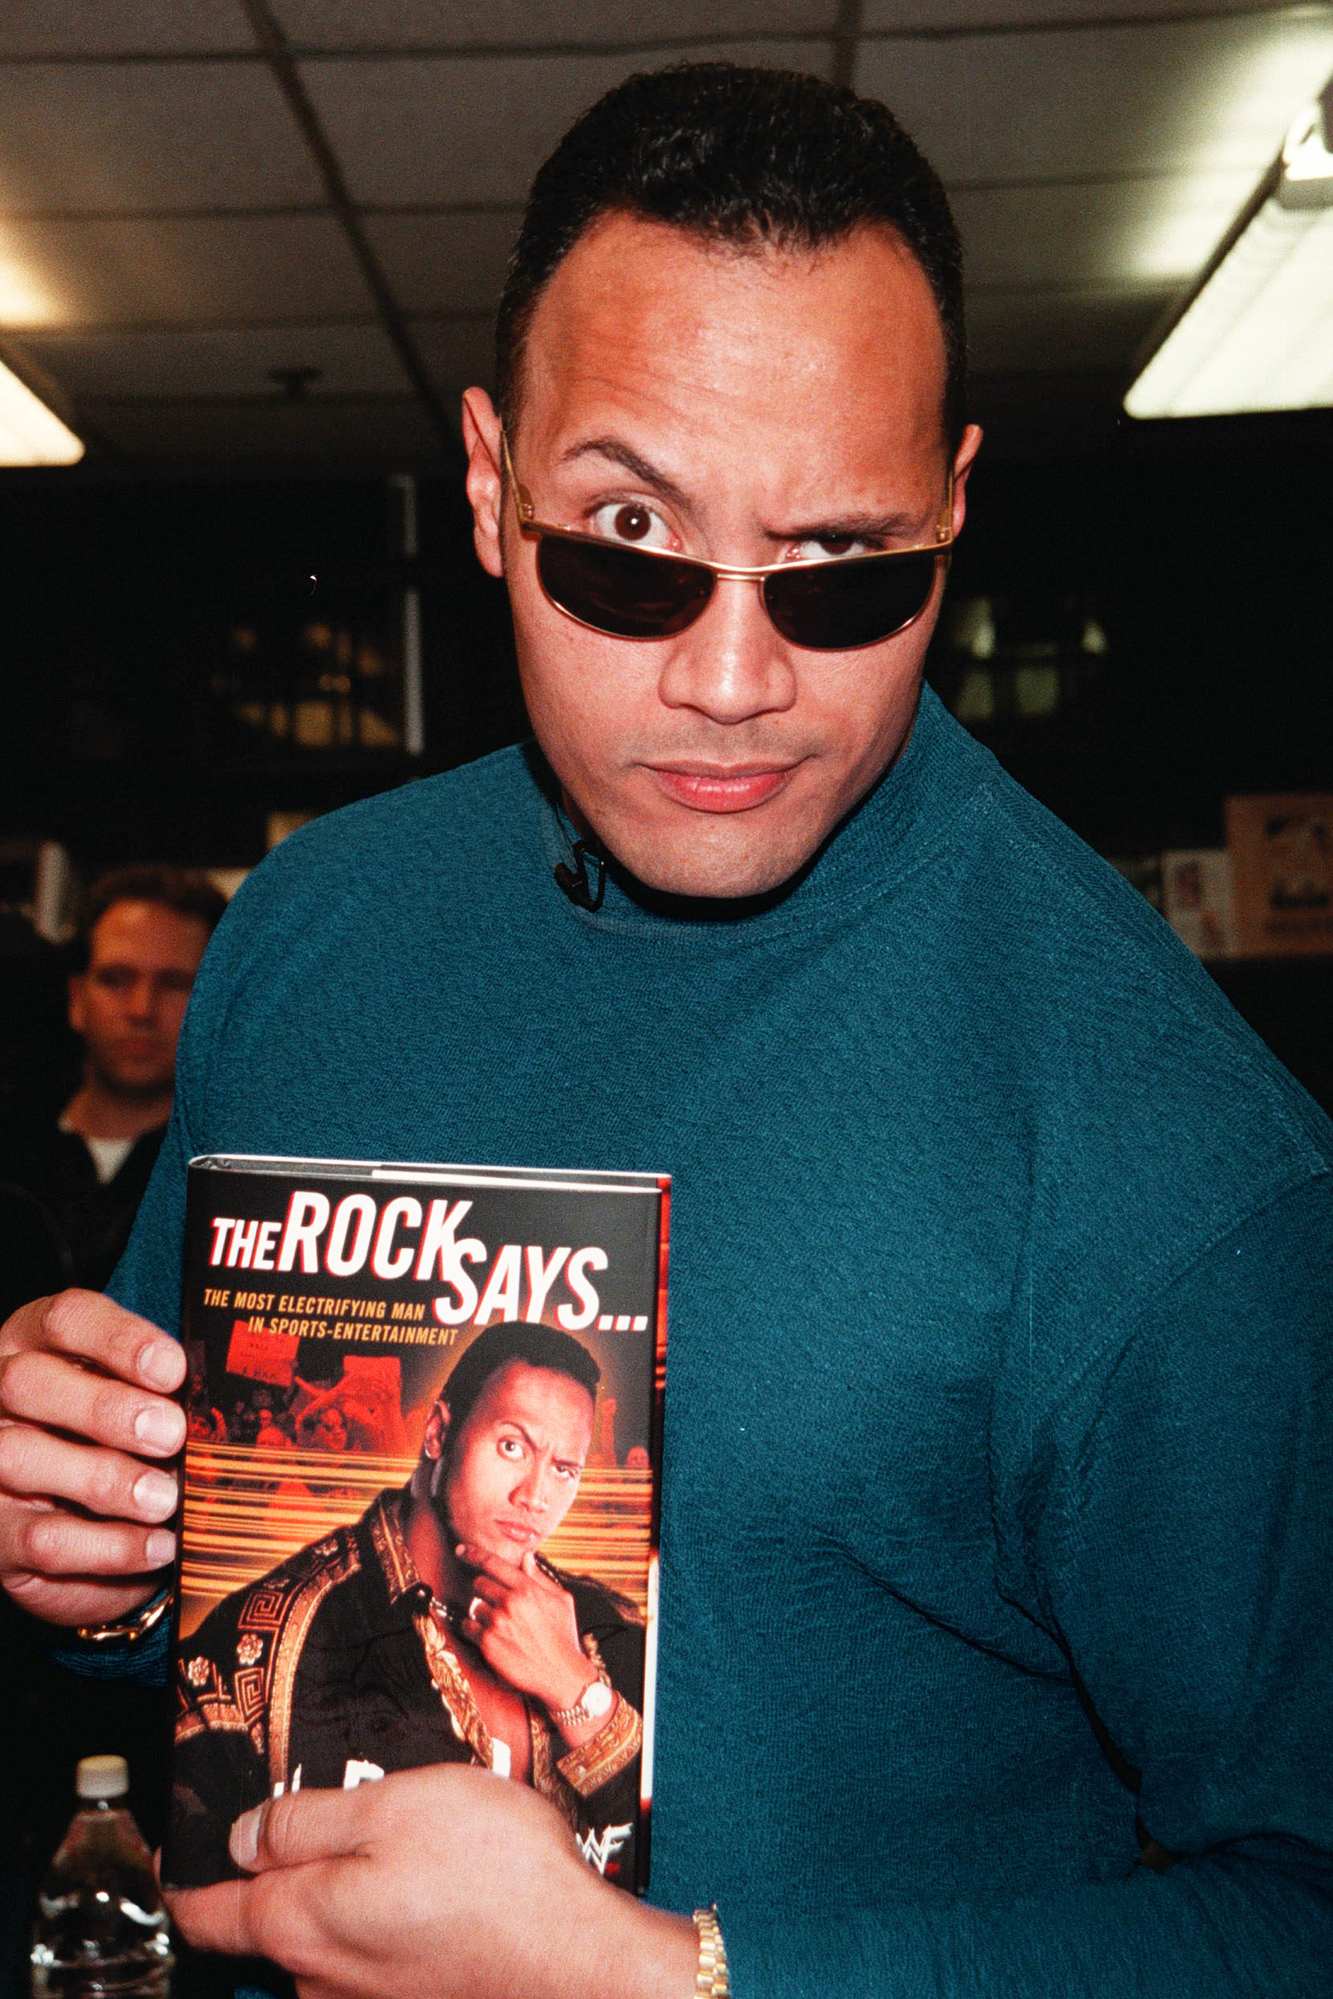 Johnson, as The Rock, at a signing for his book The Rock Says... in 2000. The book debuted at No. 1 on the New York Times Best Sellers list.